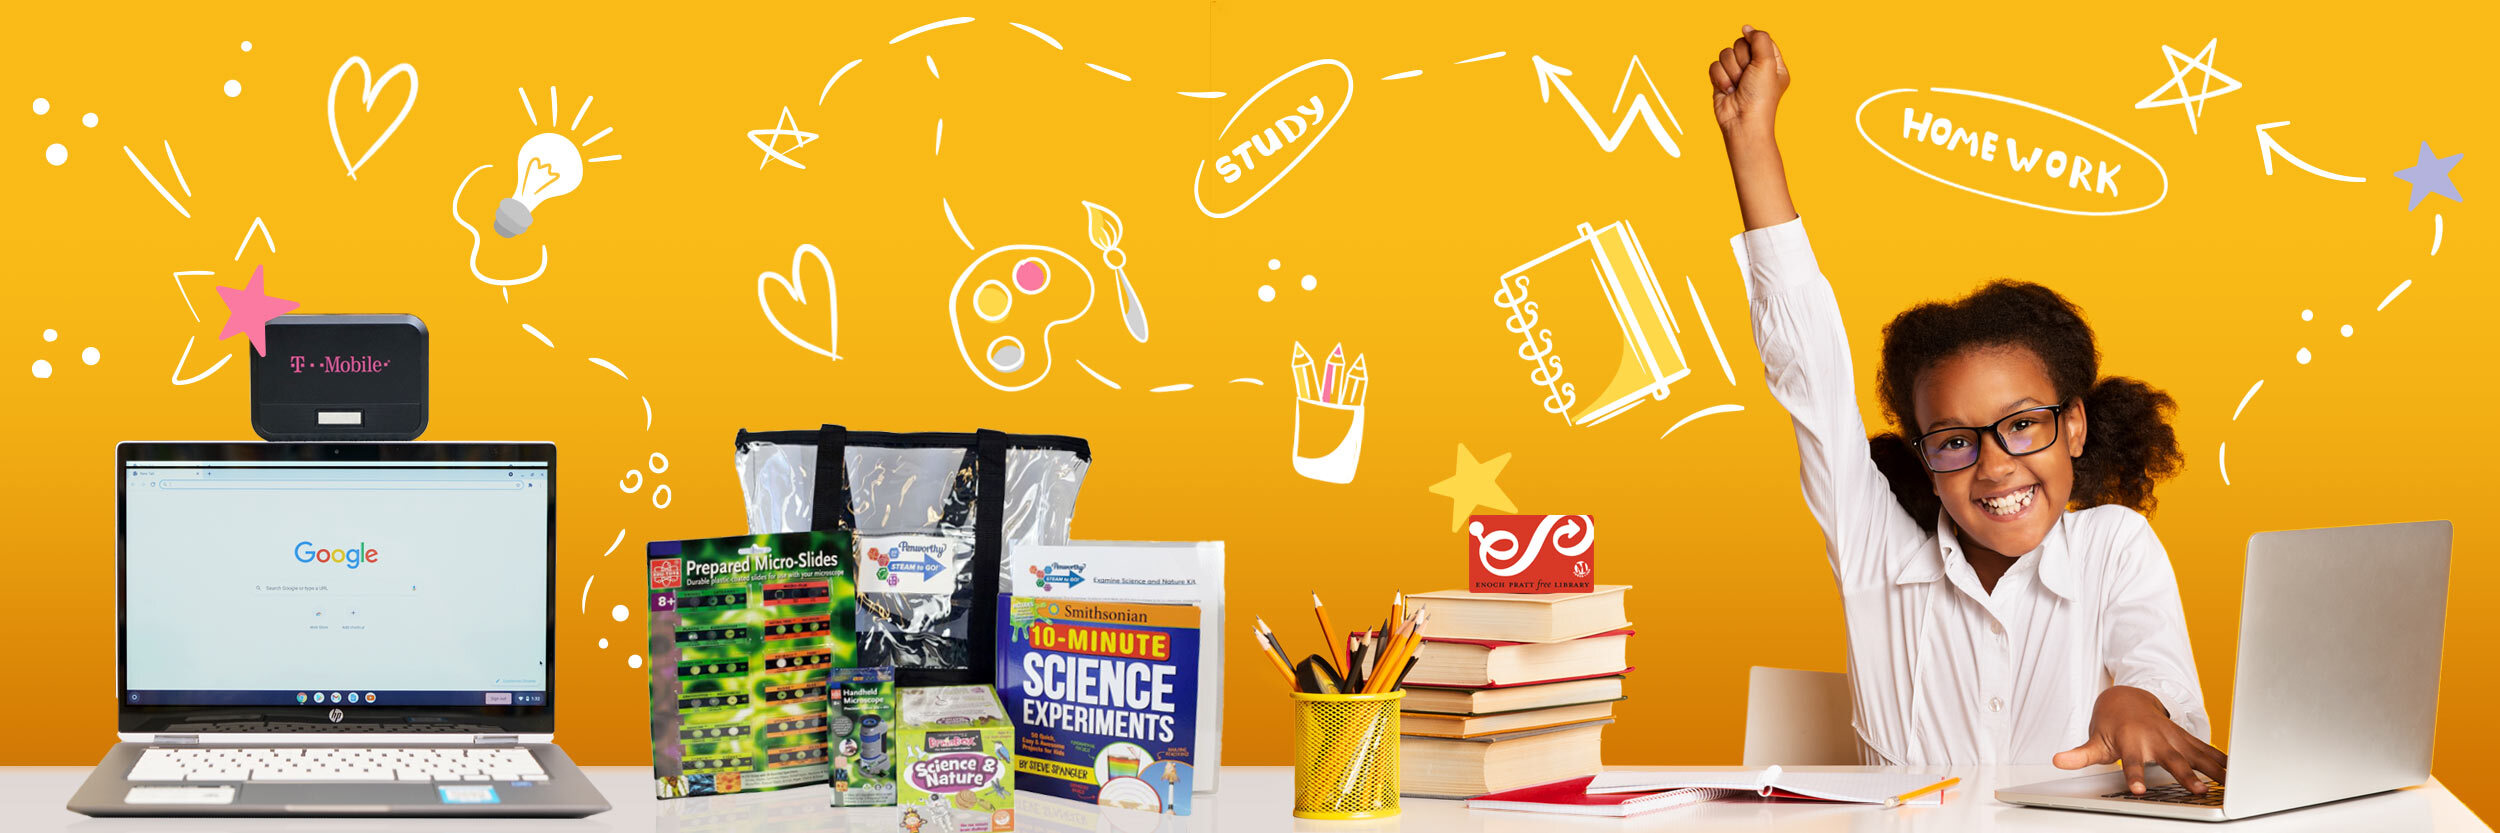 Back to School 2022 with Pratt Library - borrow free tech equipment, STEAM learning kits, books & more with a Pratt library card